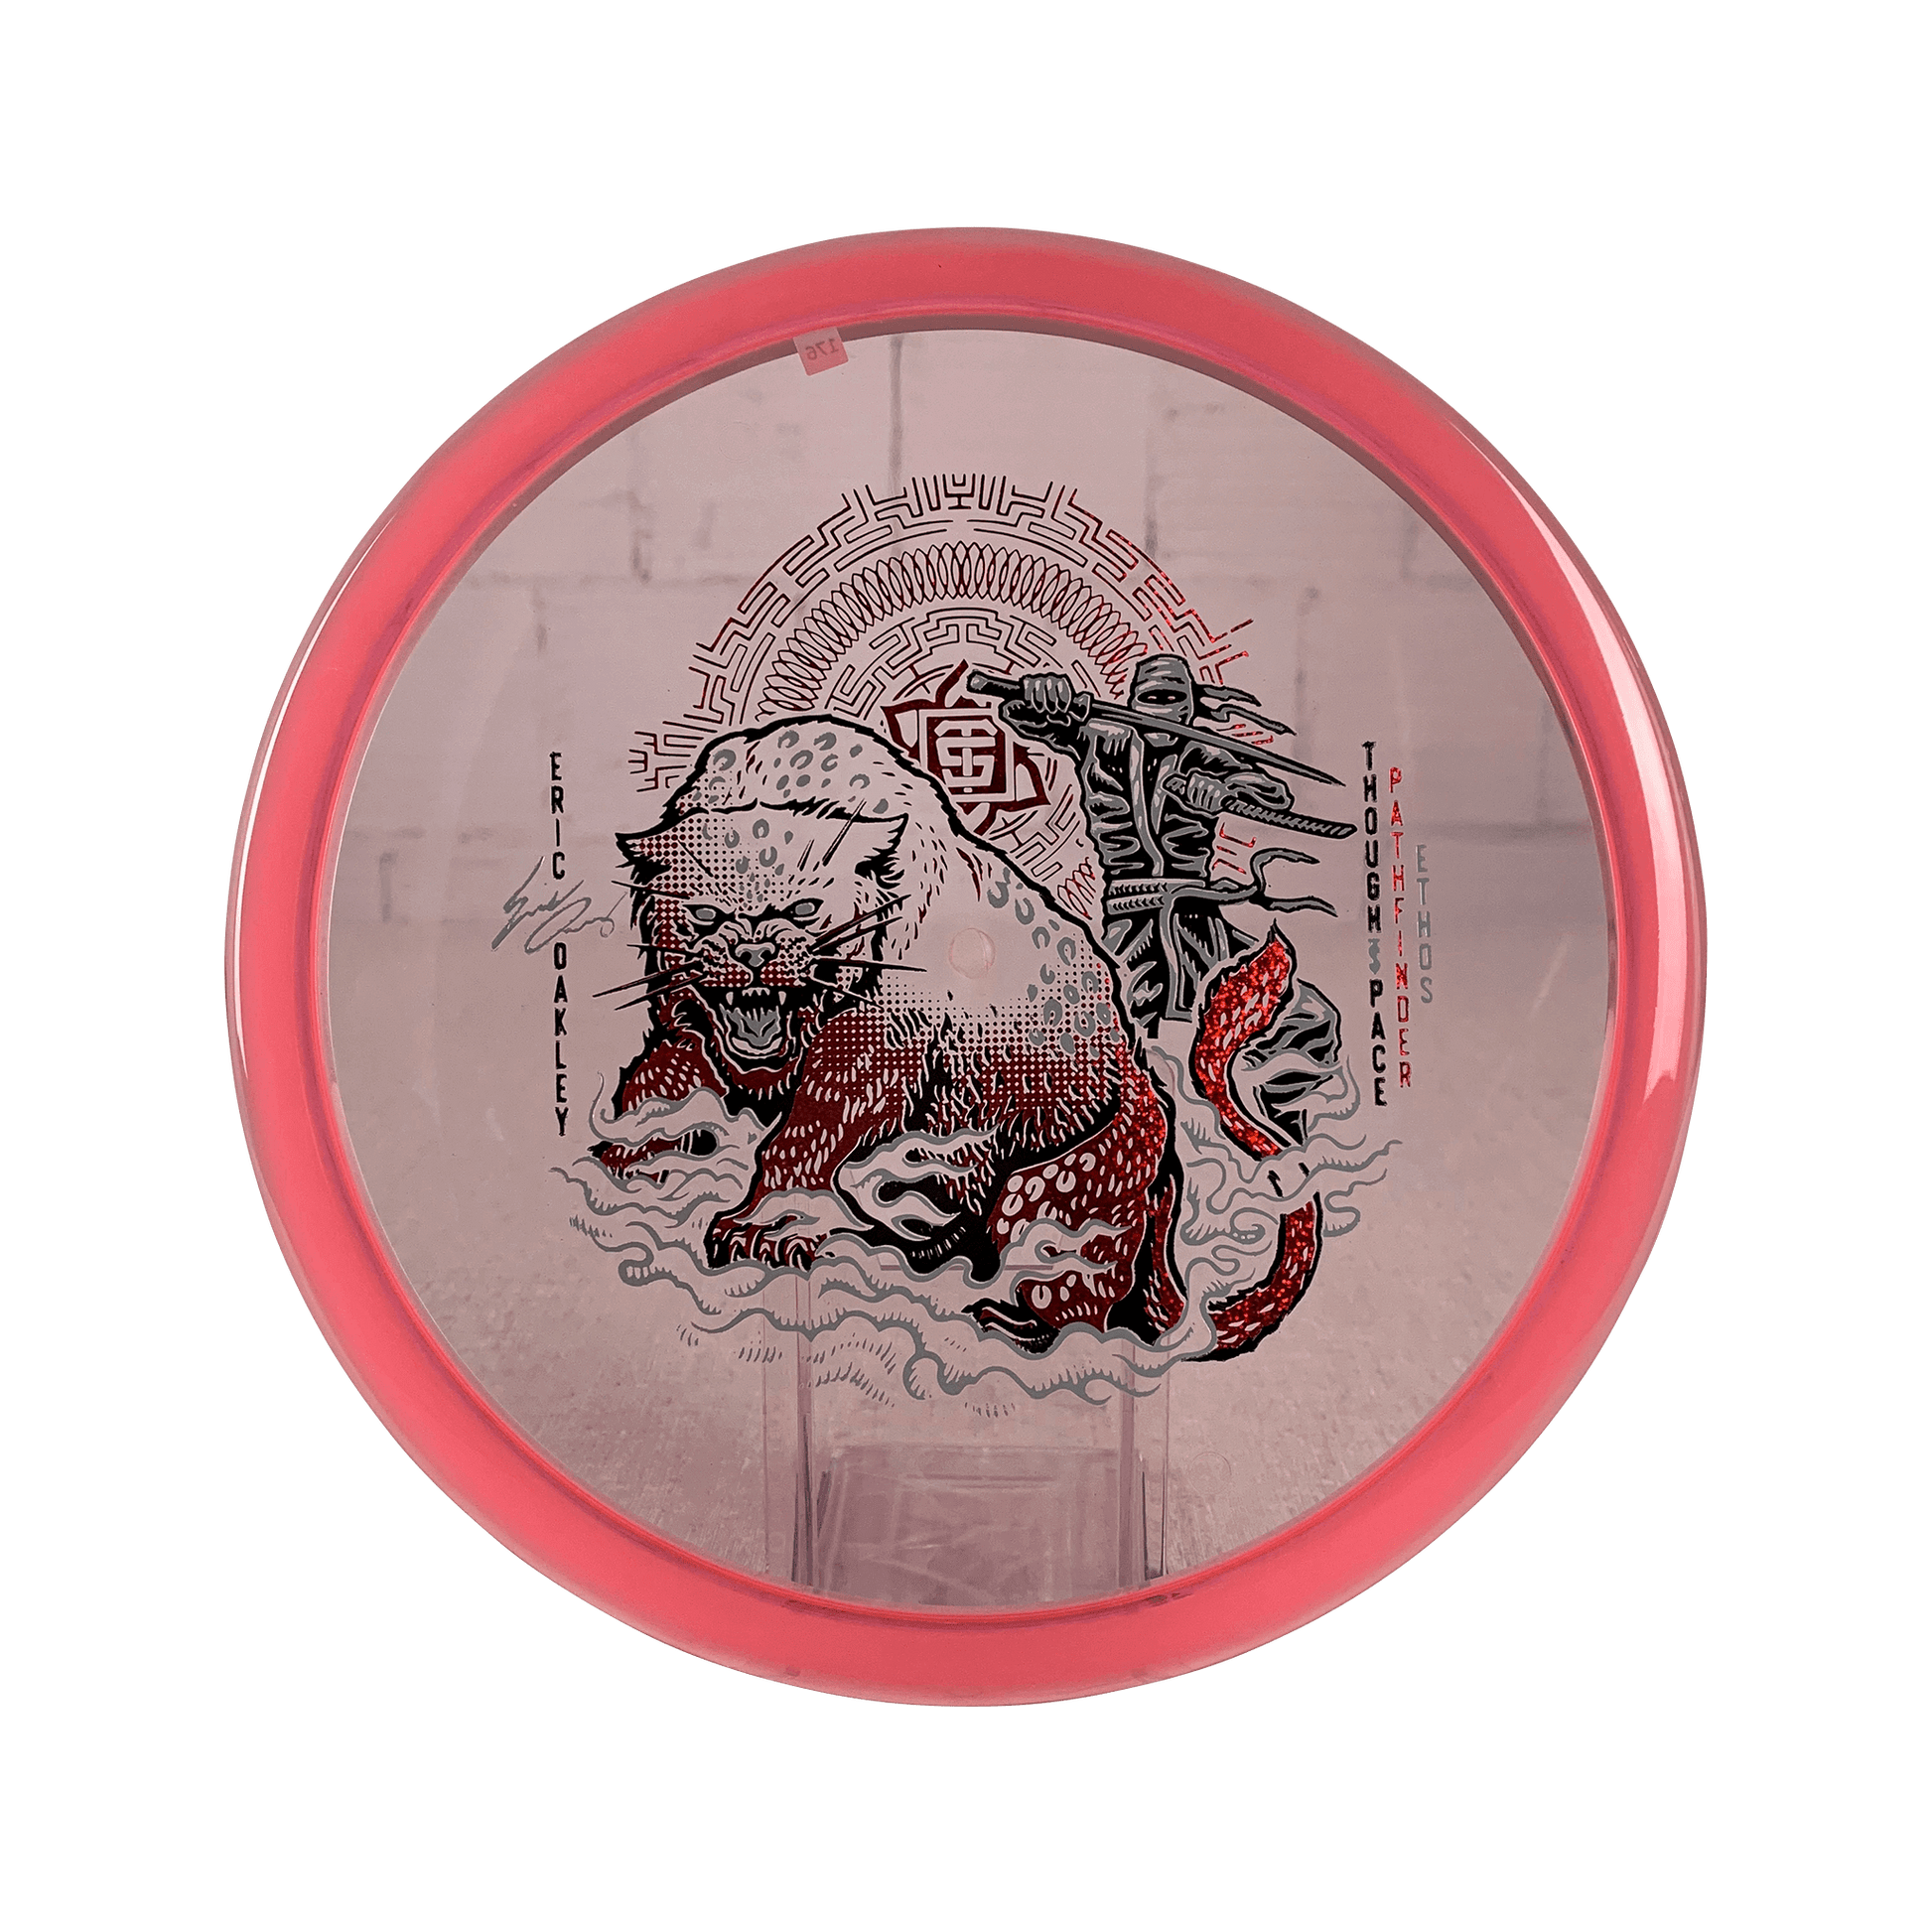 Ethos Pathfinder - Eric Oakley Signature Series Disc Thought Space Athletics pink 177 